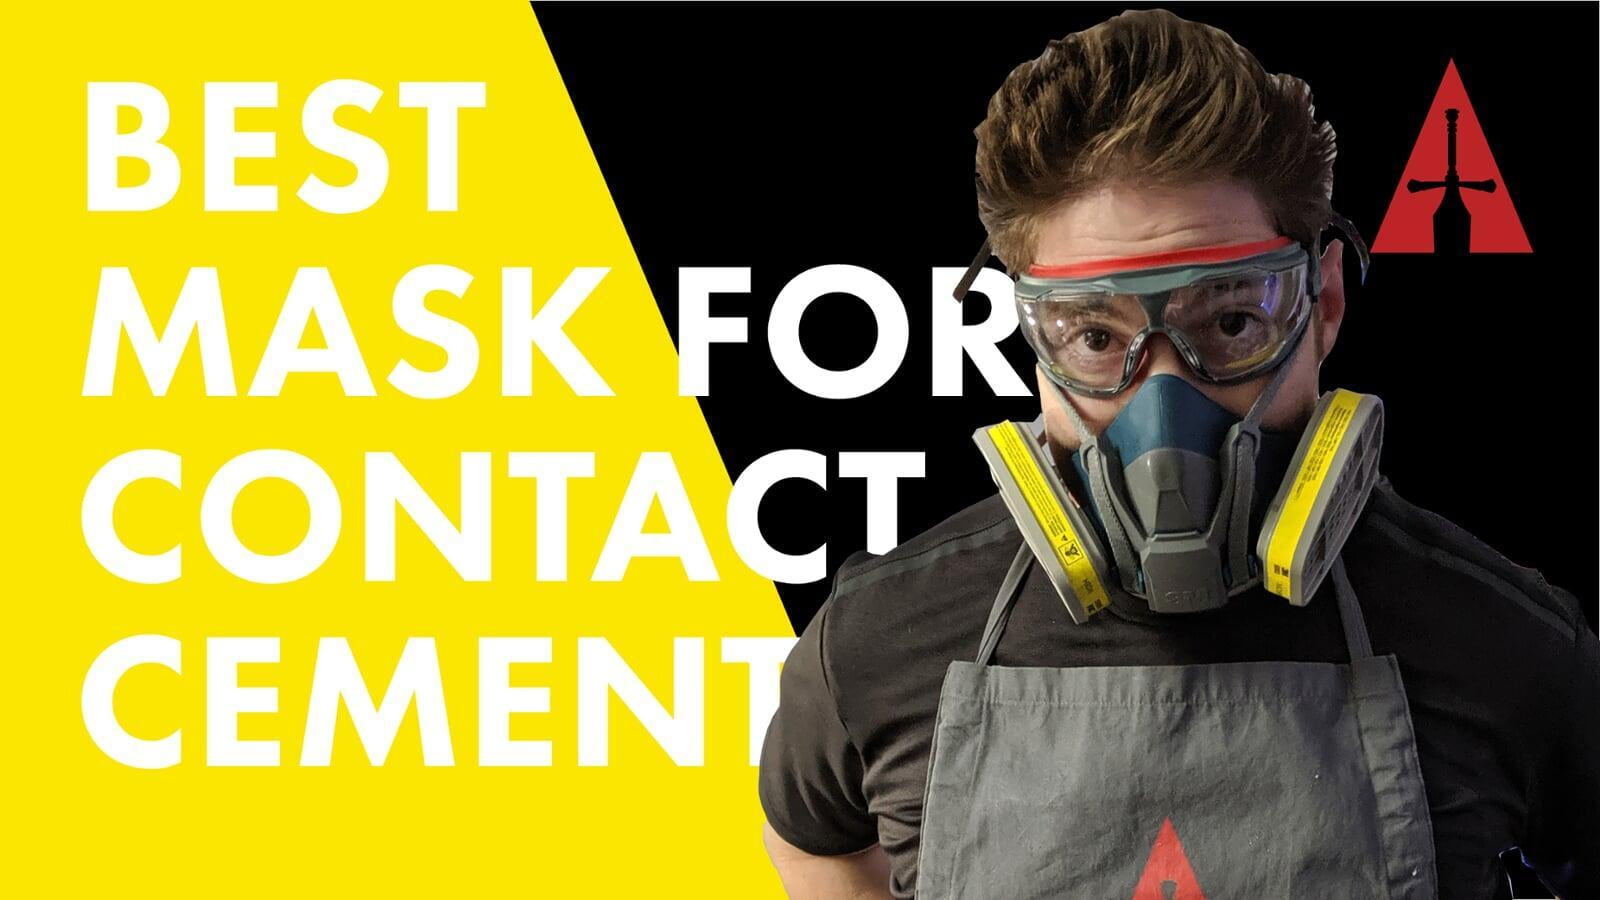 What's the right respirator for using contact cement?